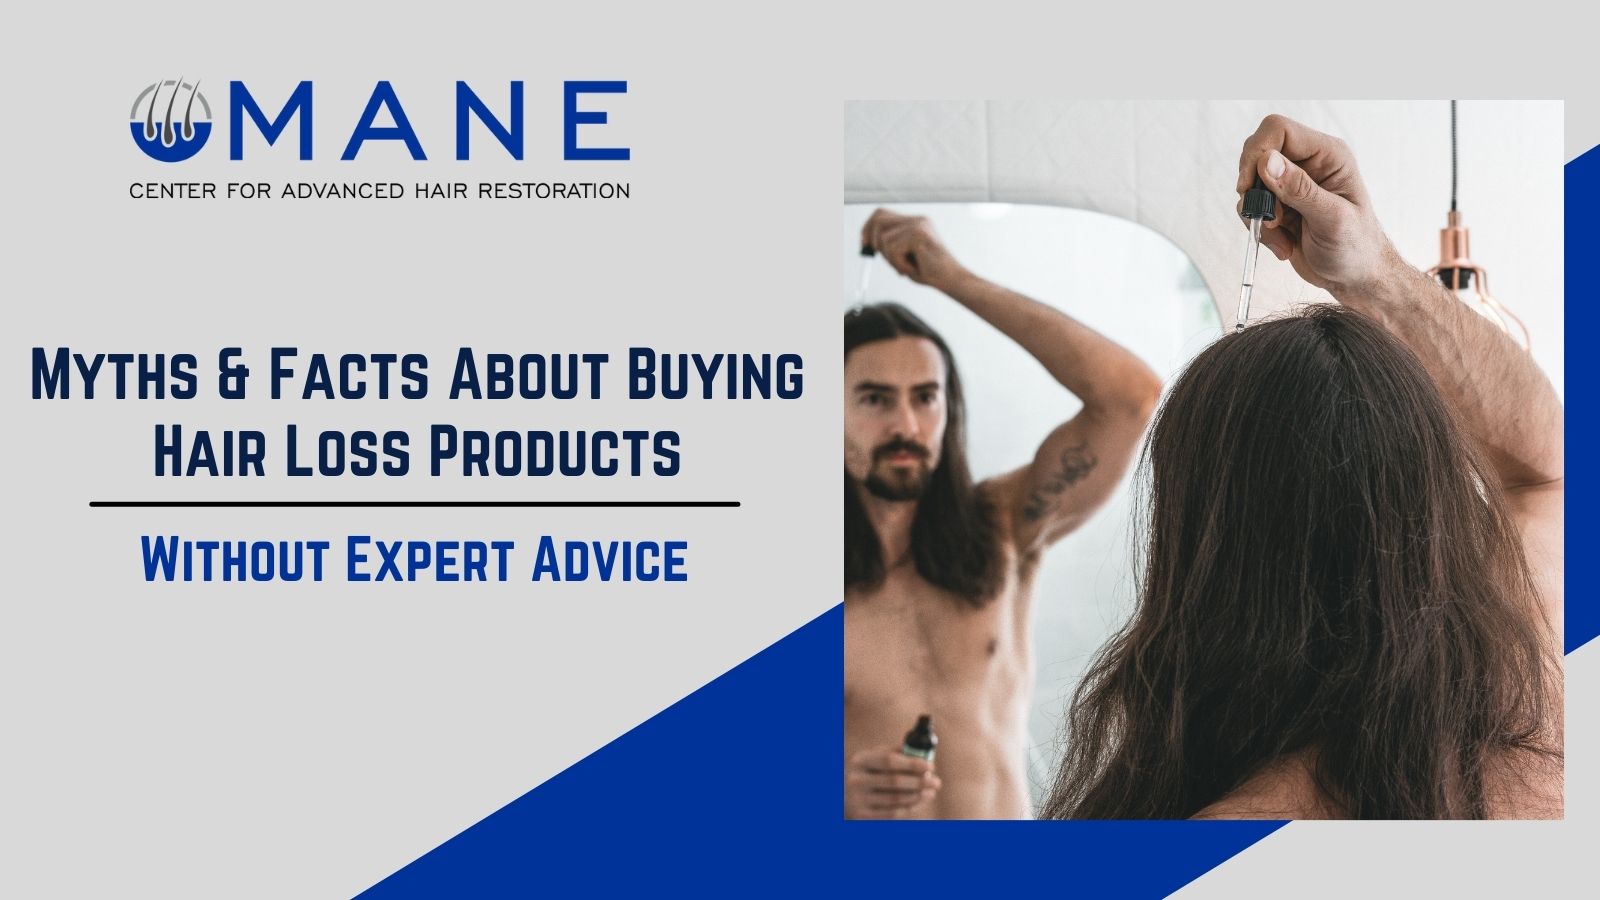 Myths & Facts About Buying Hair Loss Products Without Expert Advice